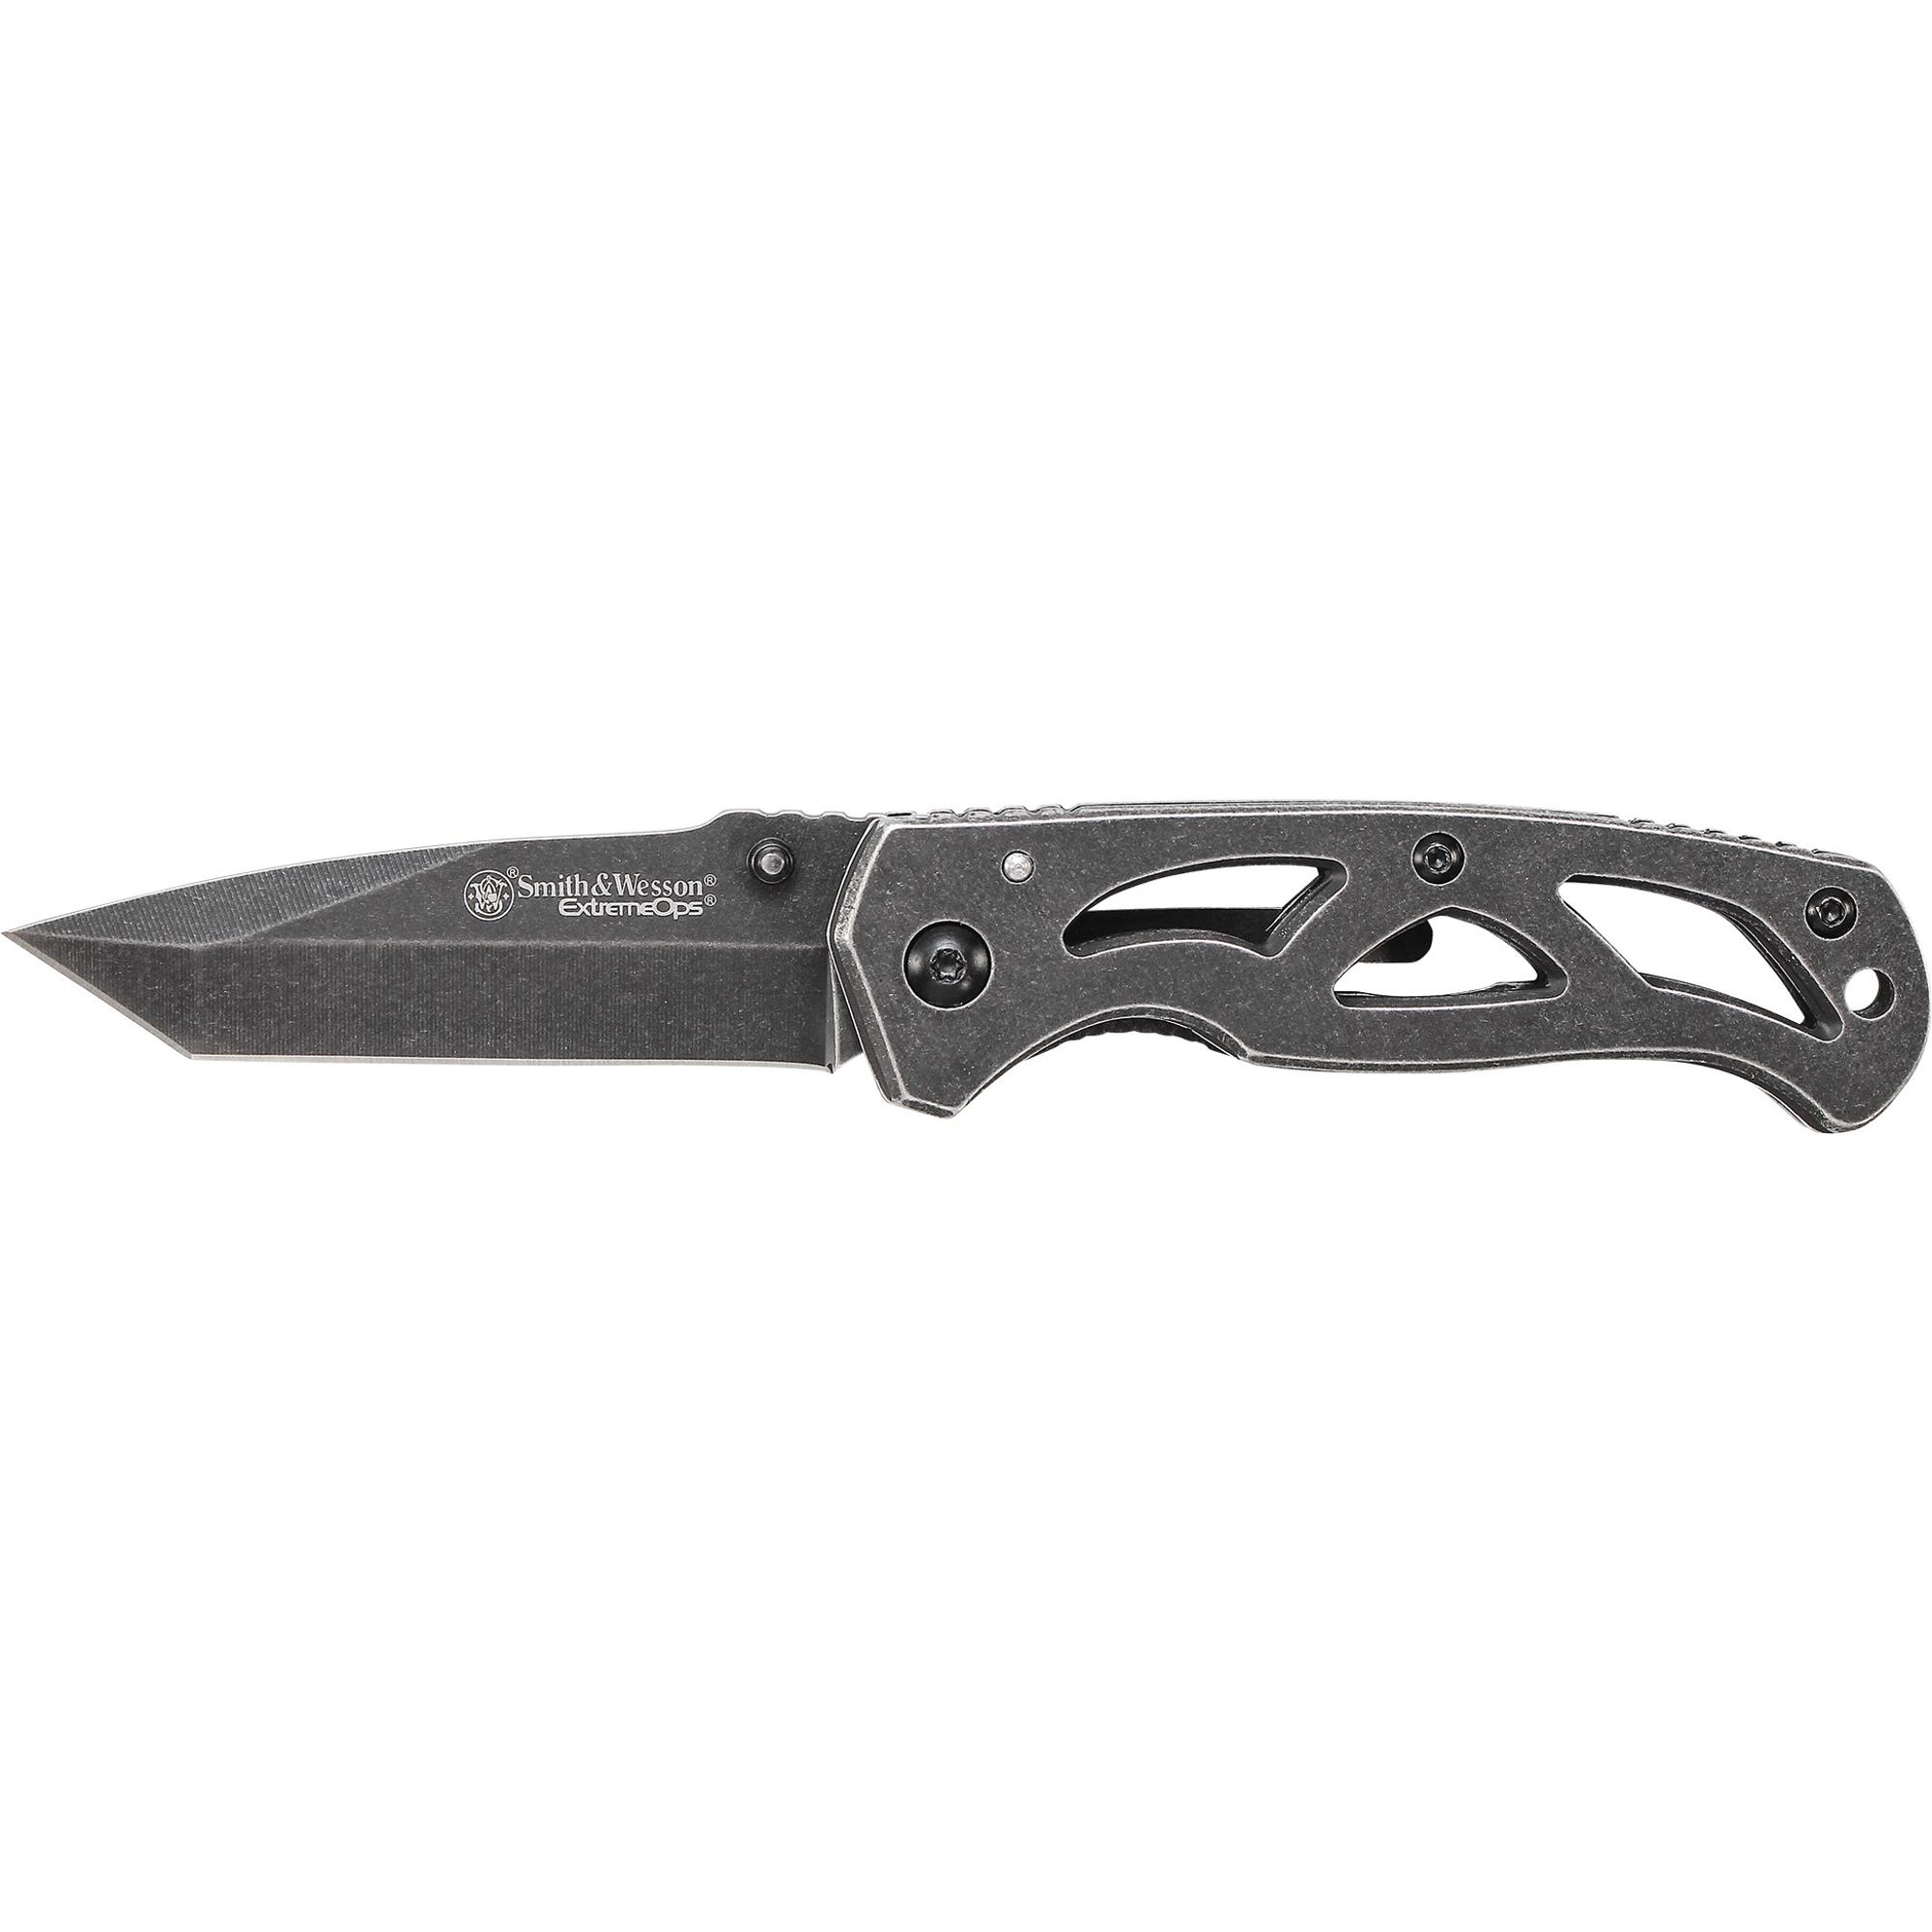 Smith & Wesson® CK404 Extreme Ops Tanto Folding Knife | Smith & Wesson